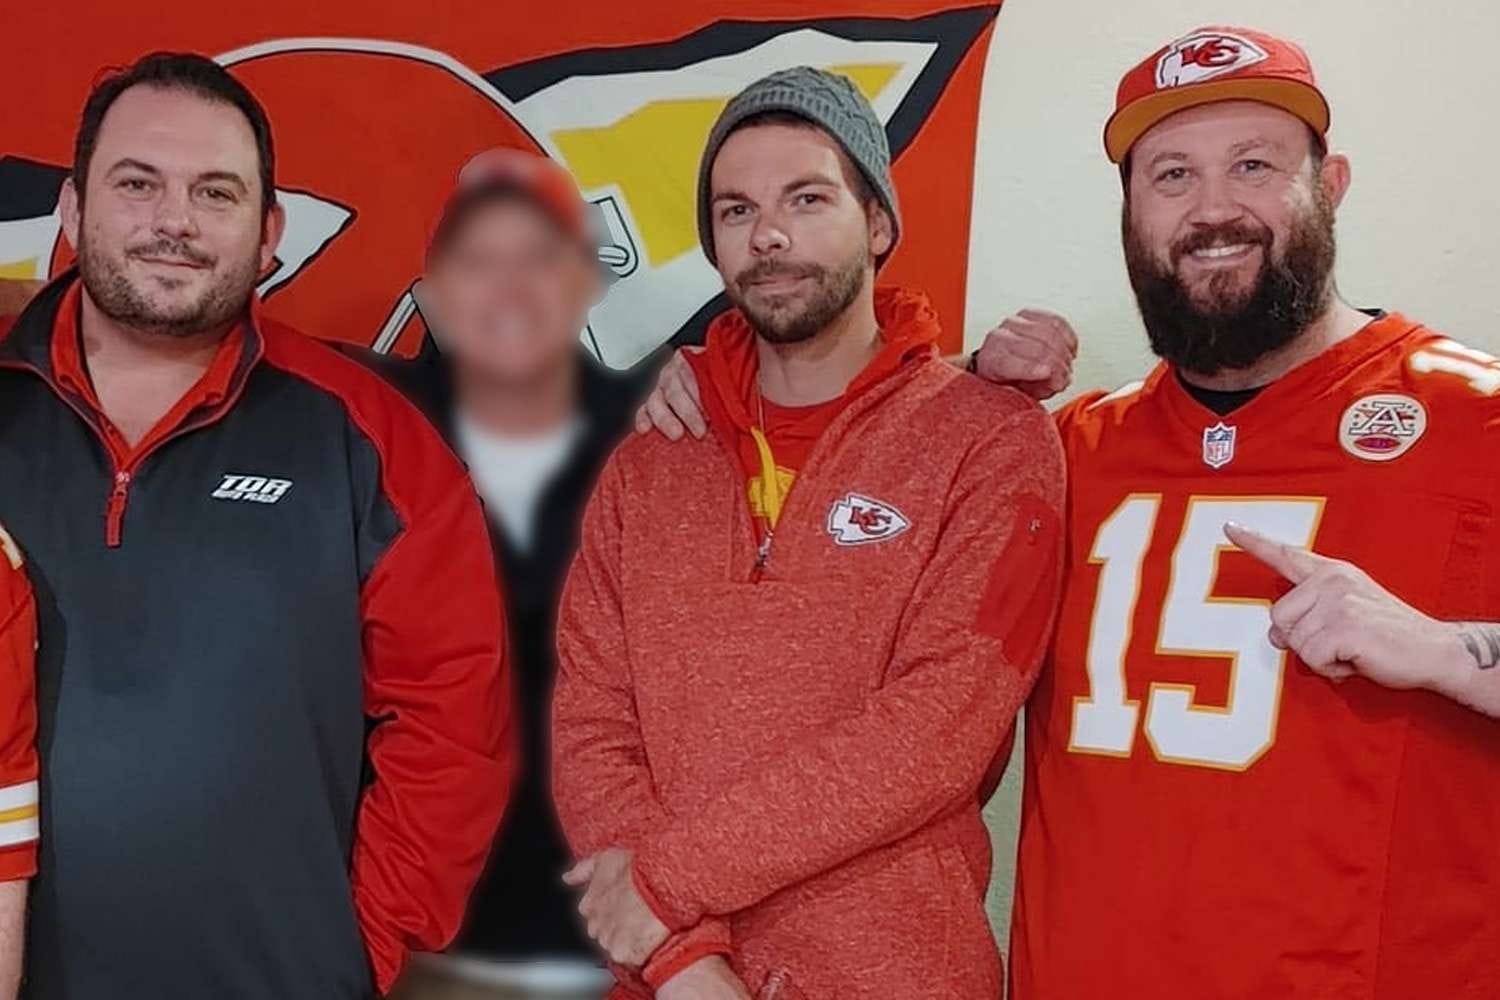 Kansas City Mystery: Three Friends Found Dead After Chiefs Game